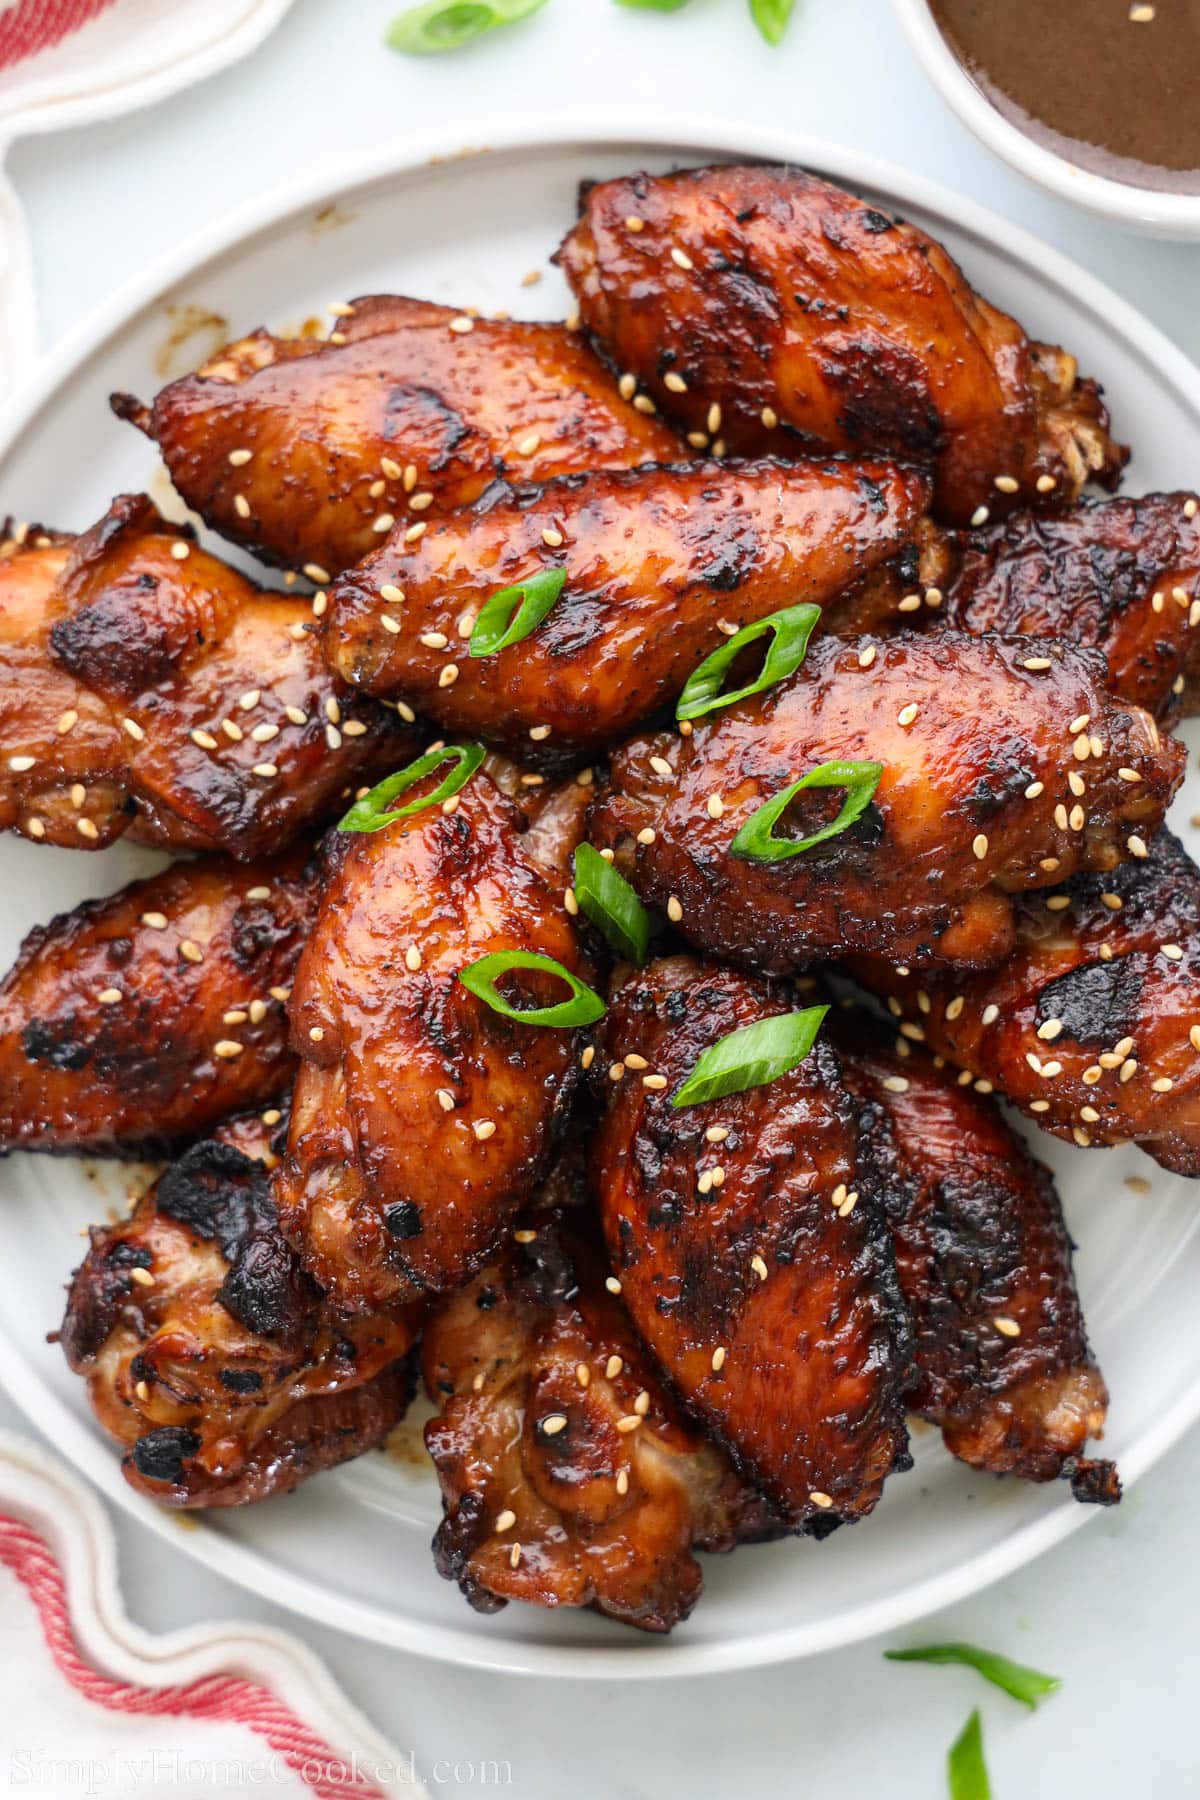 Teriyaki Chicken Wings garnished with sesame seeds and green onion on a white plate.